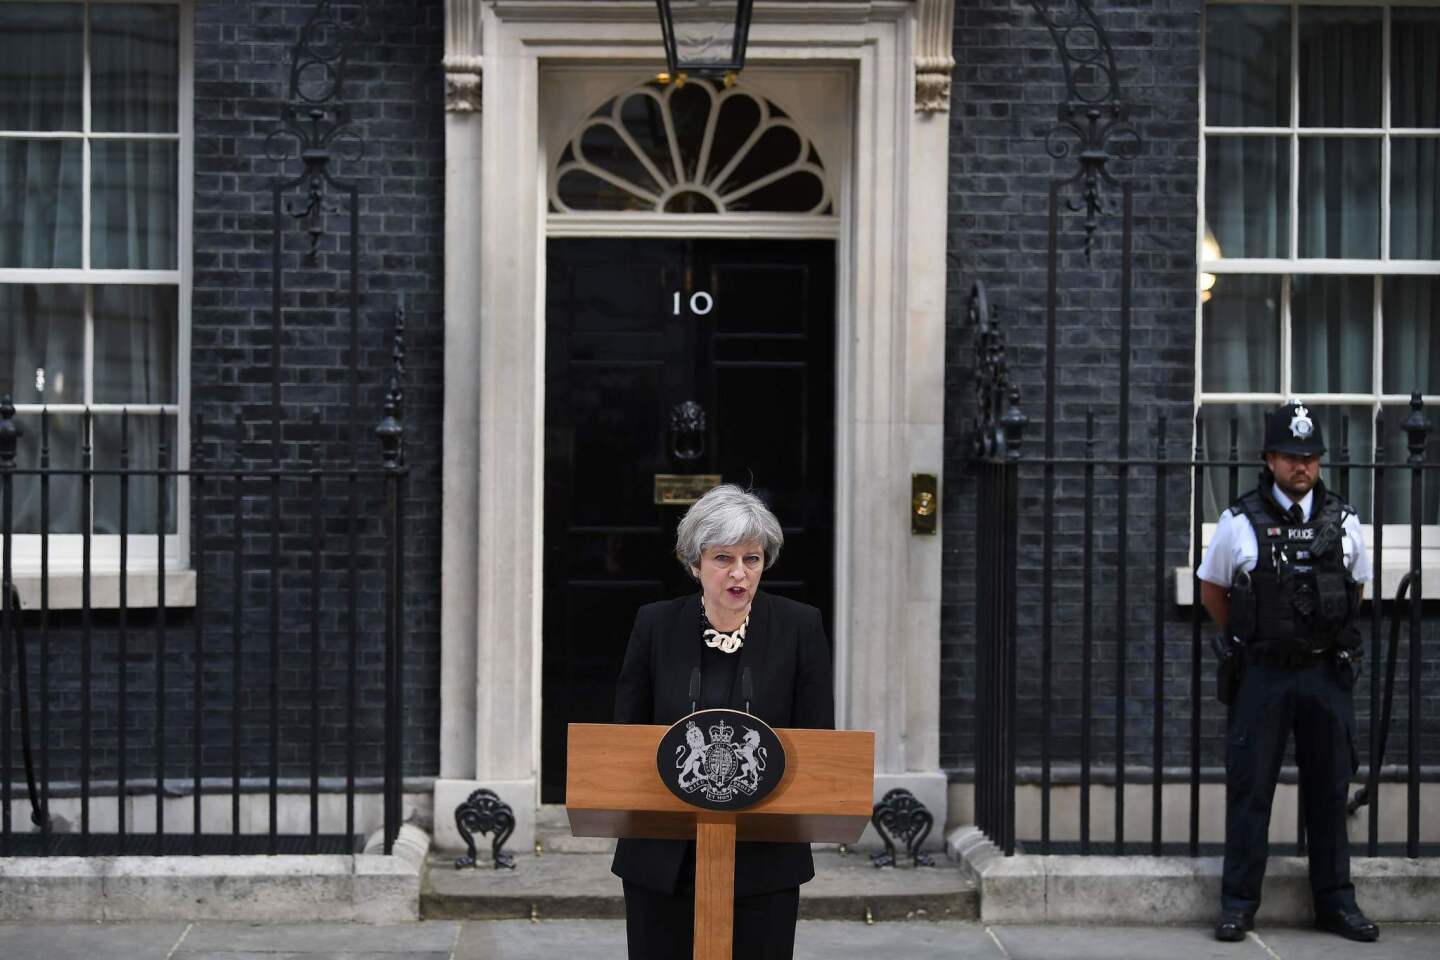 Britain's Prime Minister Theresa May delivers a statement outside 10 Downing Street in central London on June 4, 2017, following the June 3 terror attack.